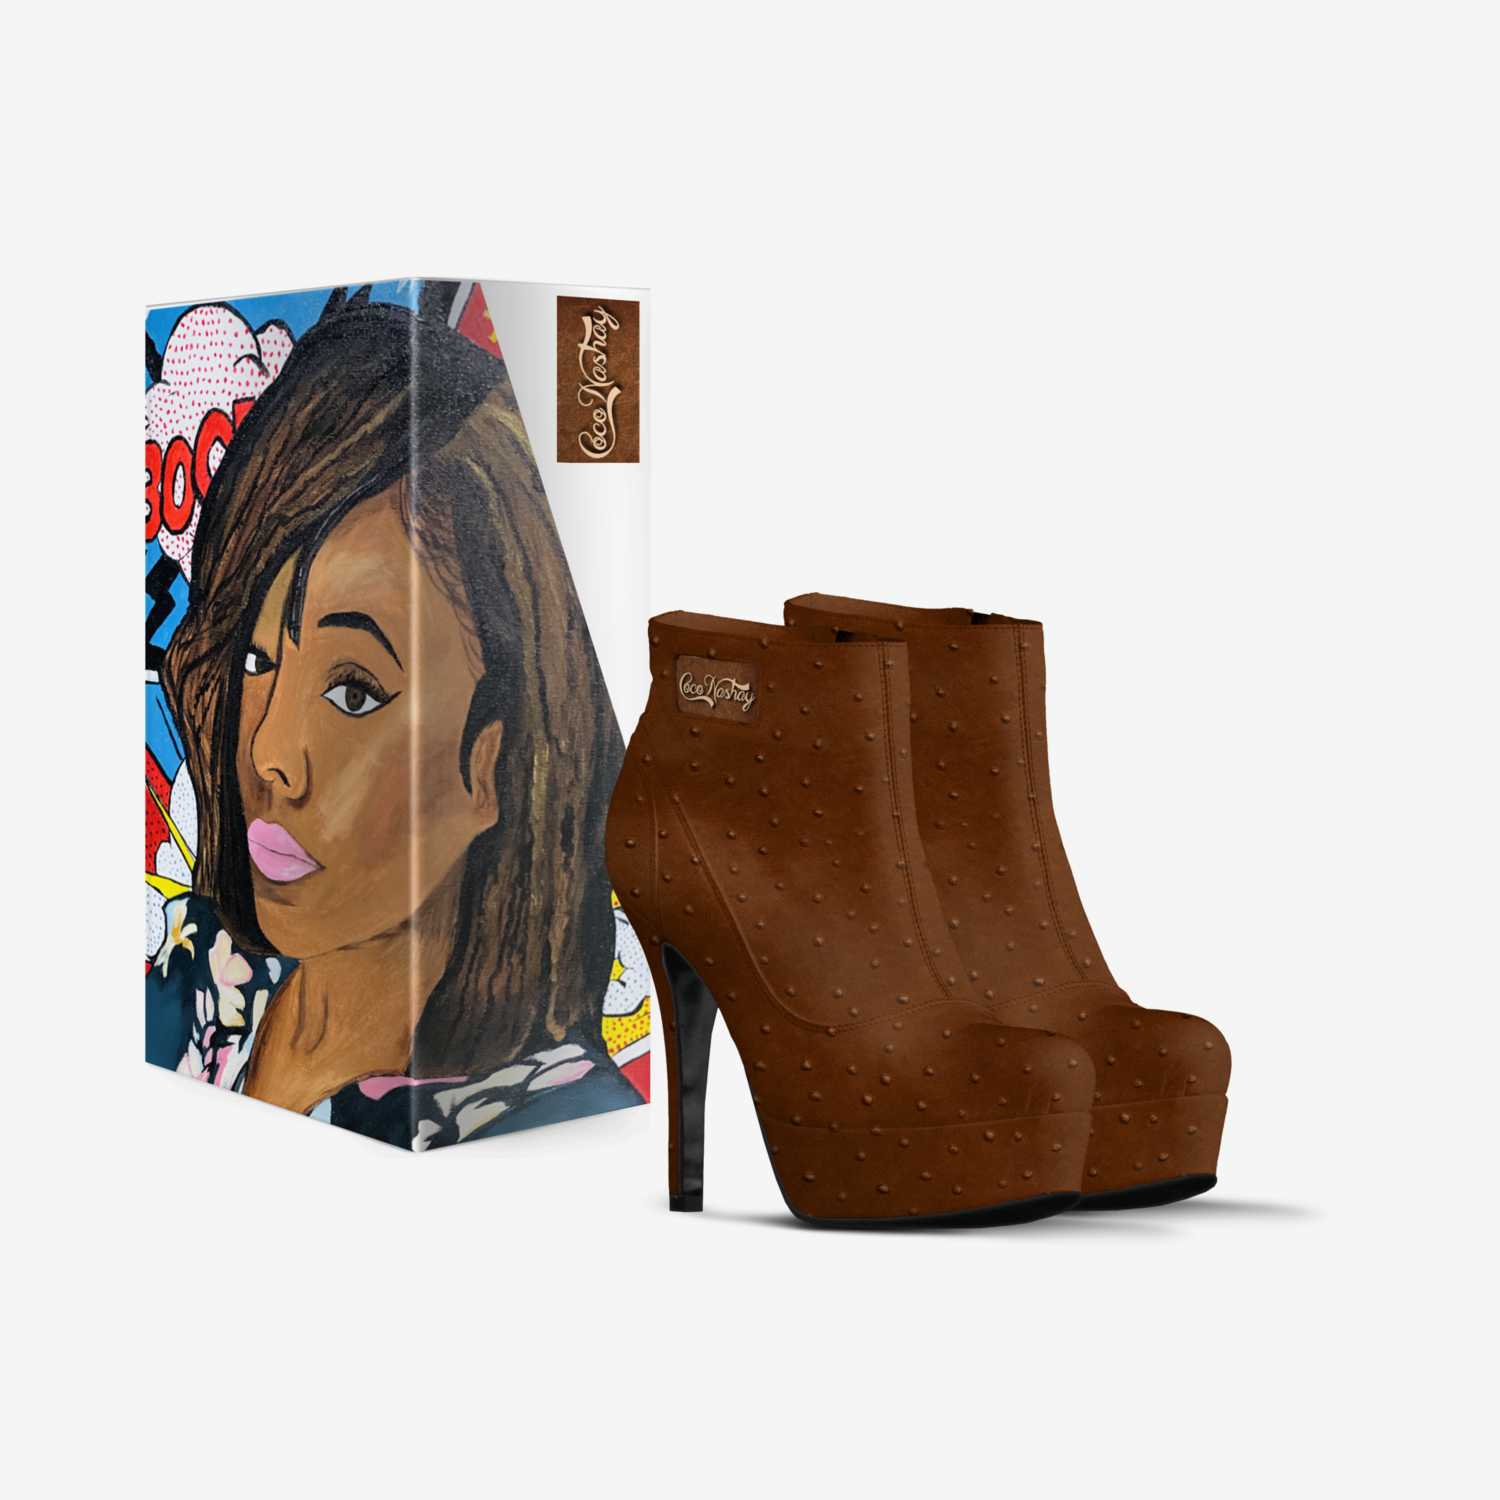 Fantaejah custom made in Italy shoes by Nakesha Caldwell | Box view